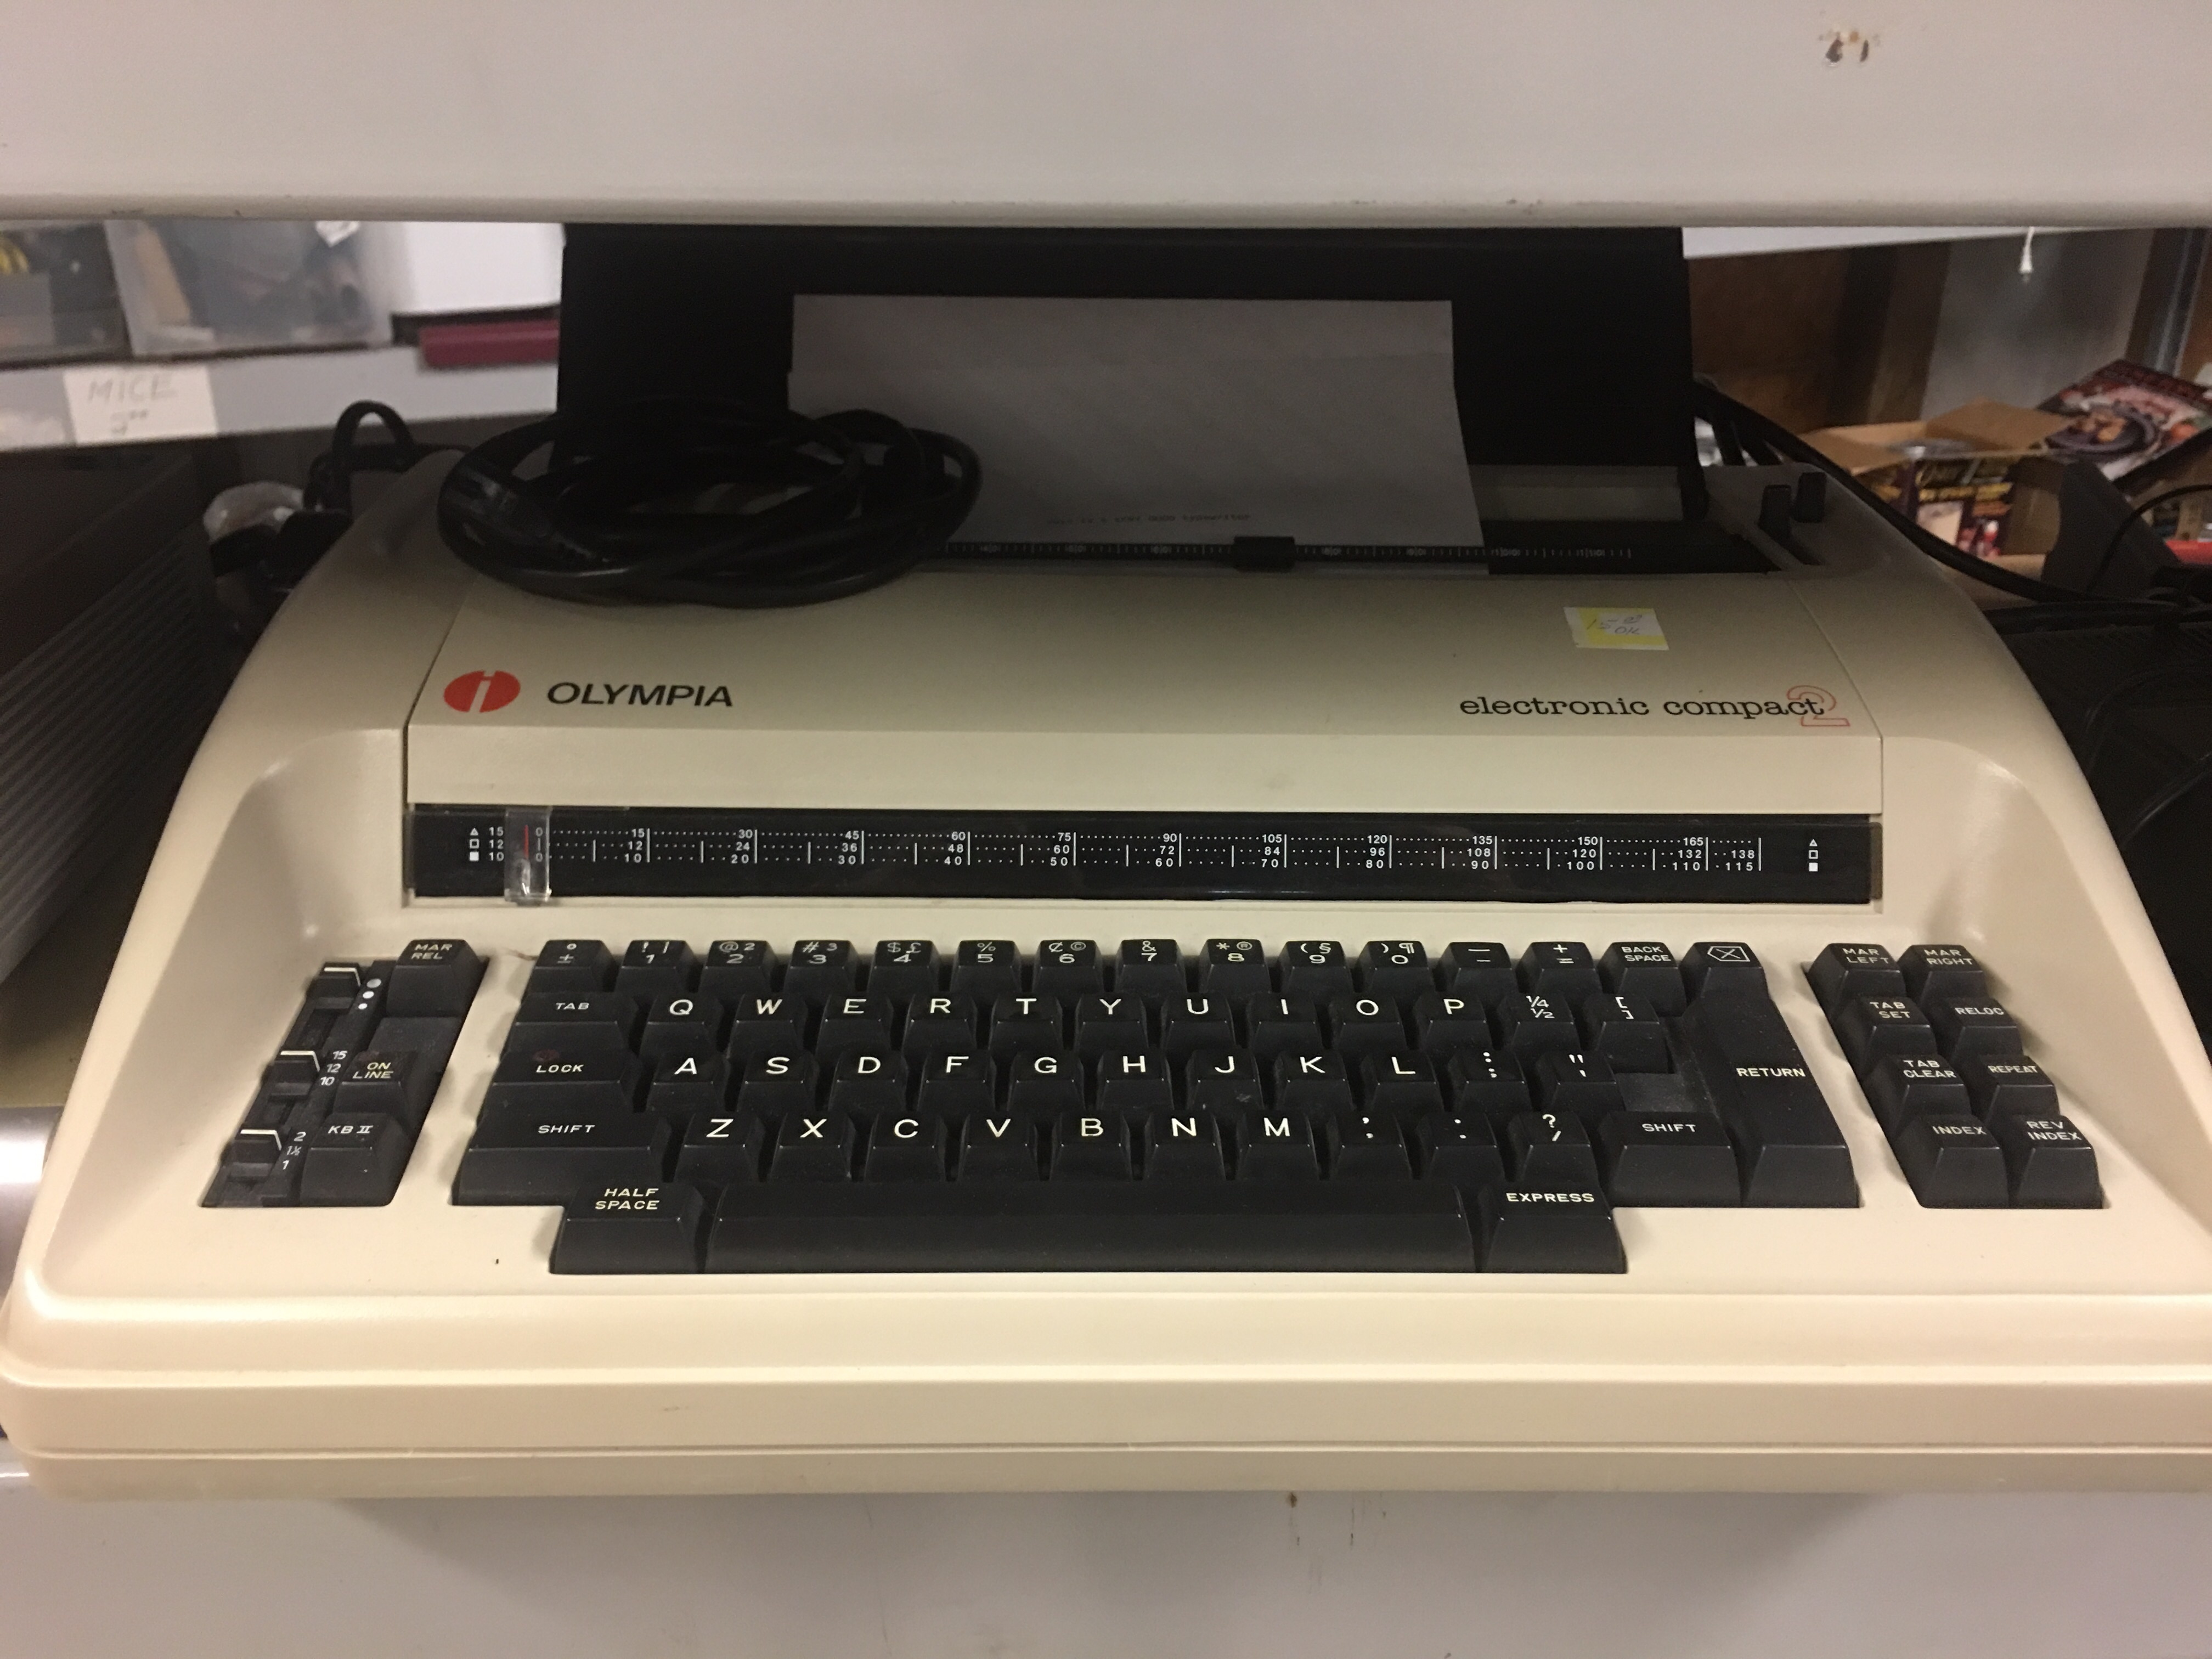 Update: I was at a thrift shop and found a similar kind of electric typewriter that I think could have been similar to the one I learned to type on in high school. 